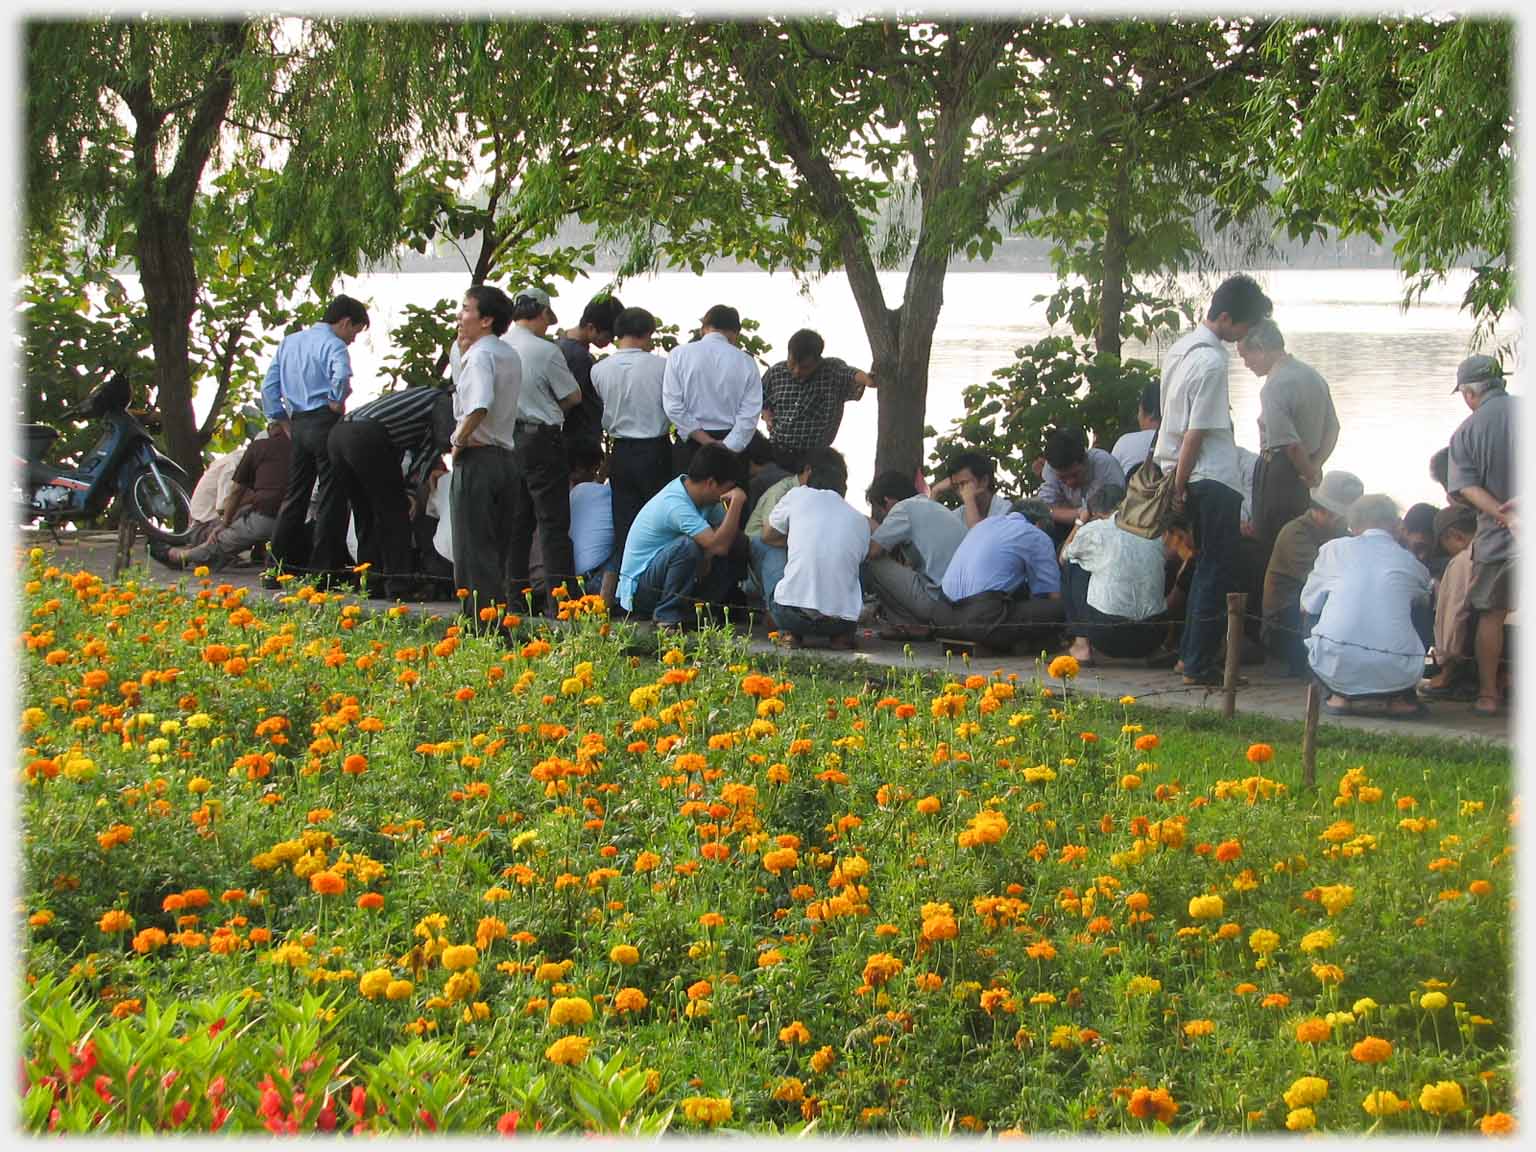 Yellow flowers in foreground couple dozen men sitting and watching in groups by lake.